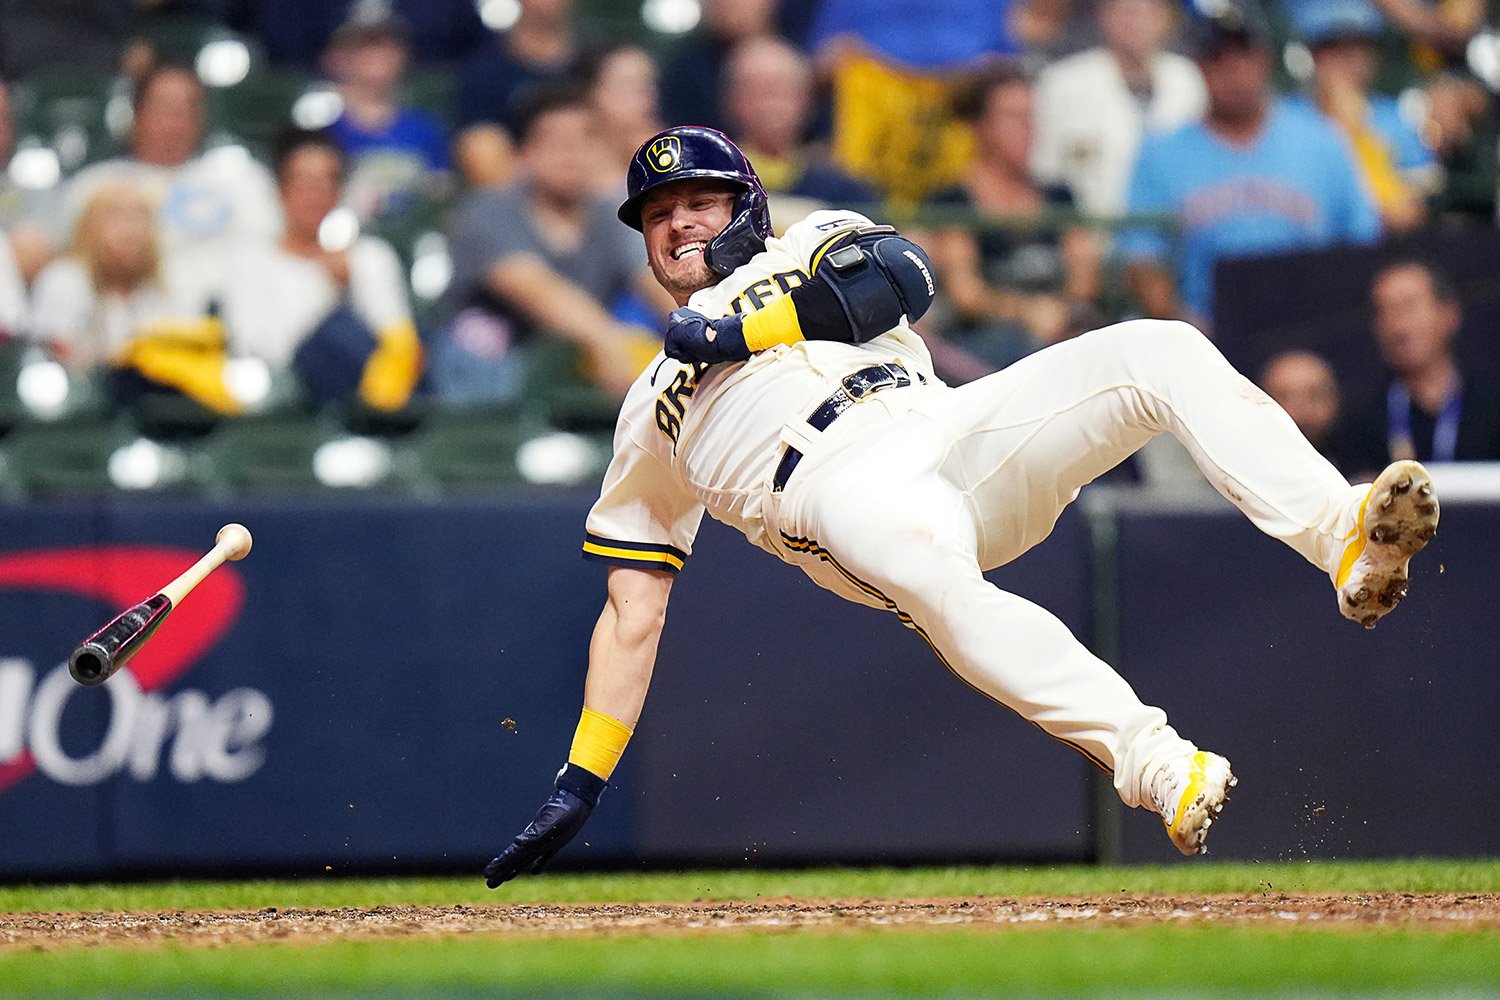 Brewers share positive injury update on Mitchell.